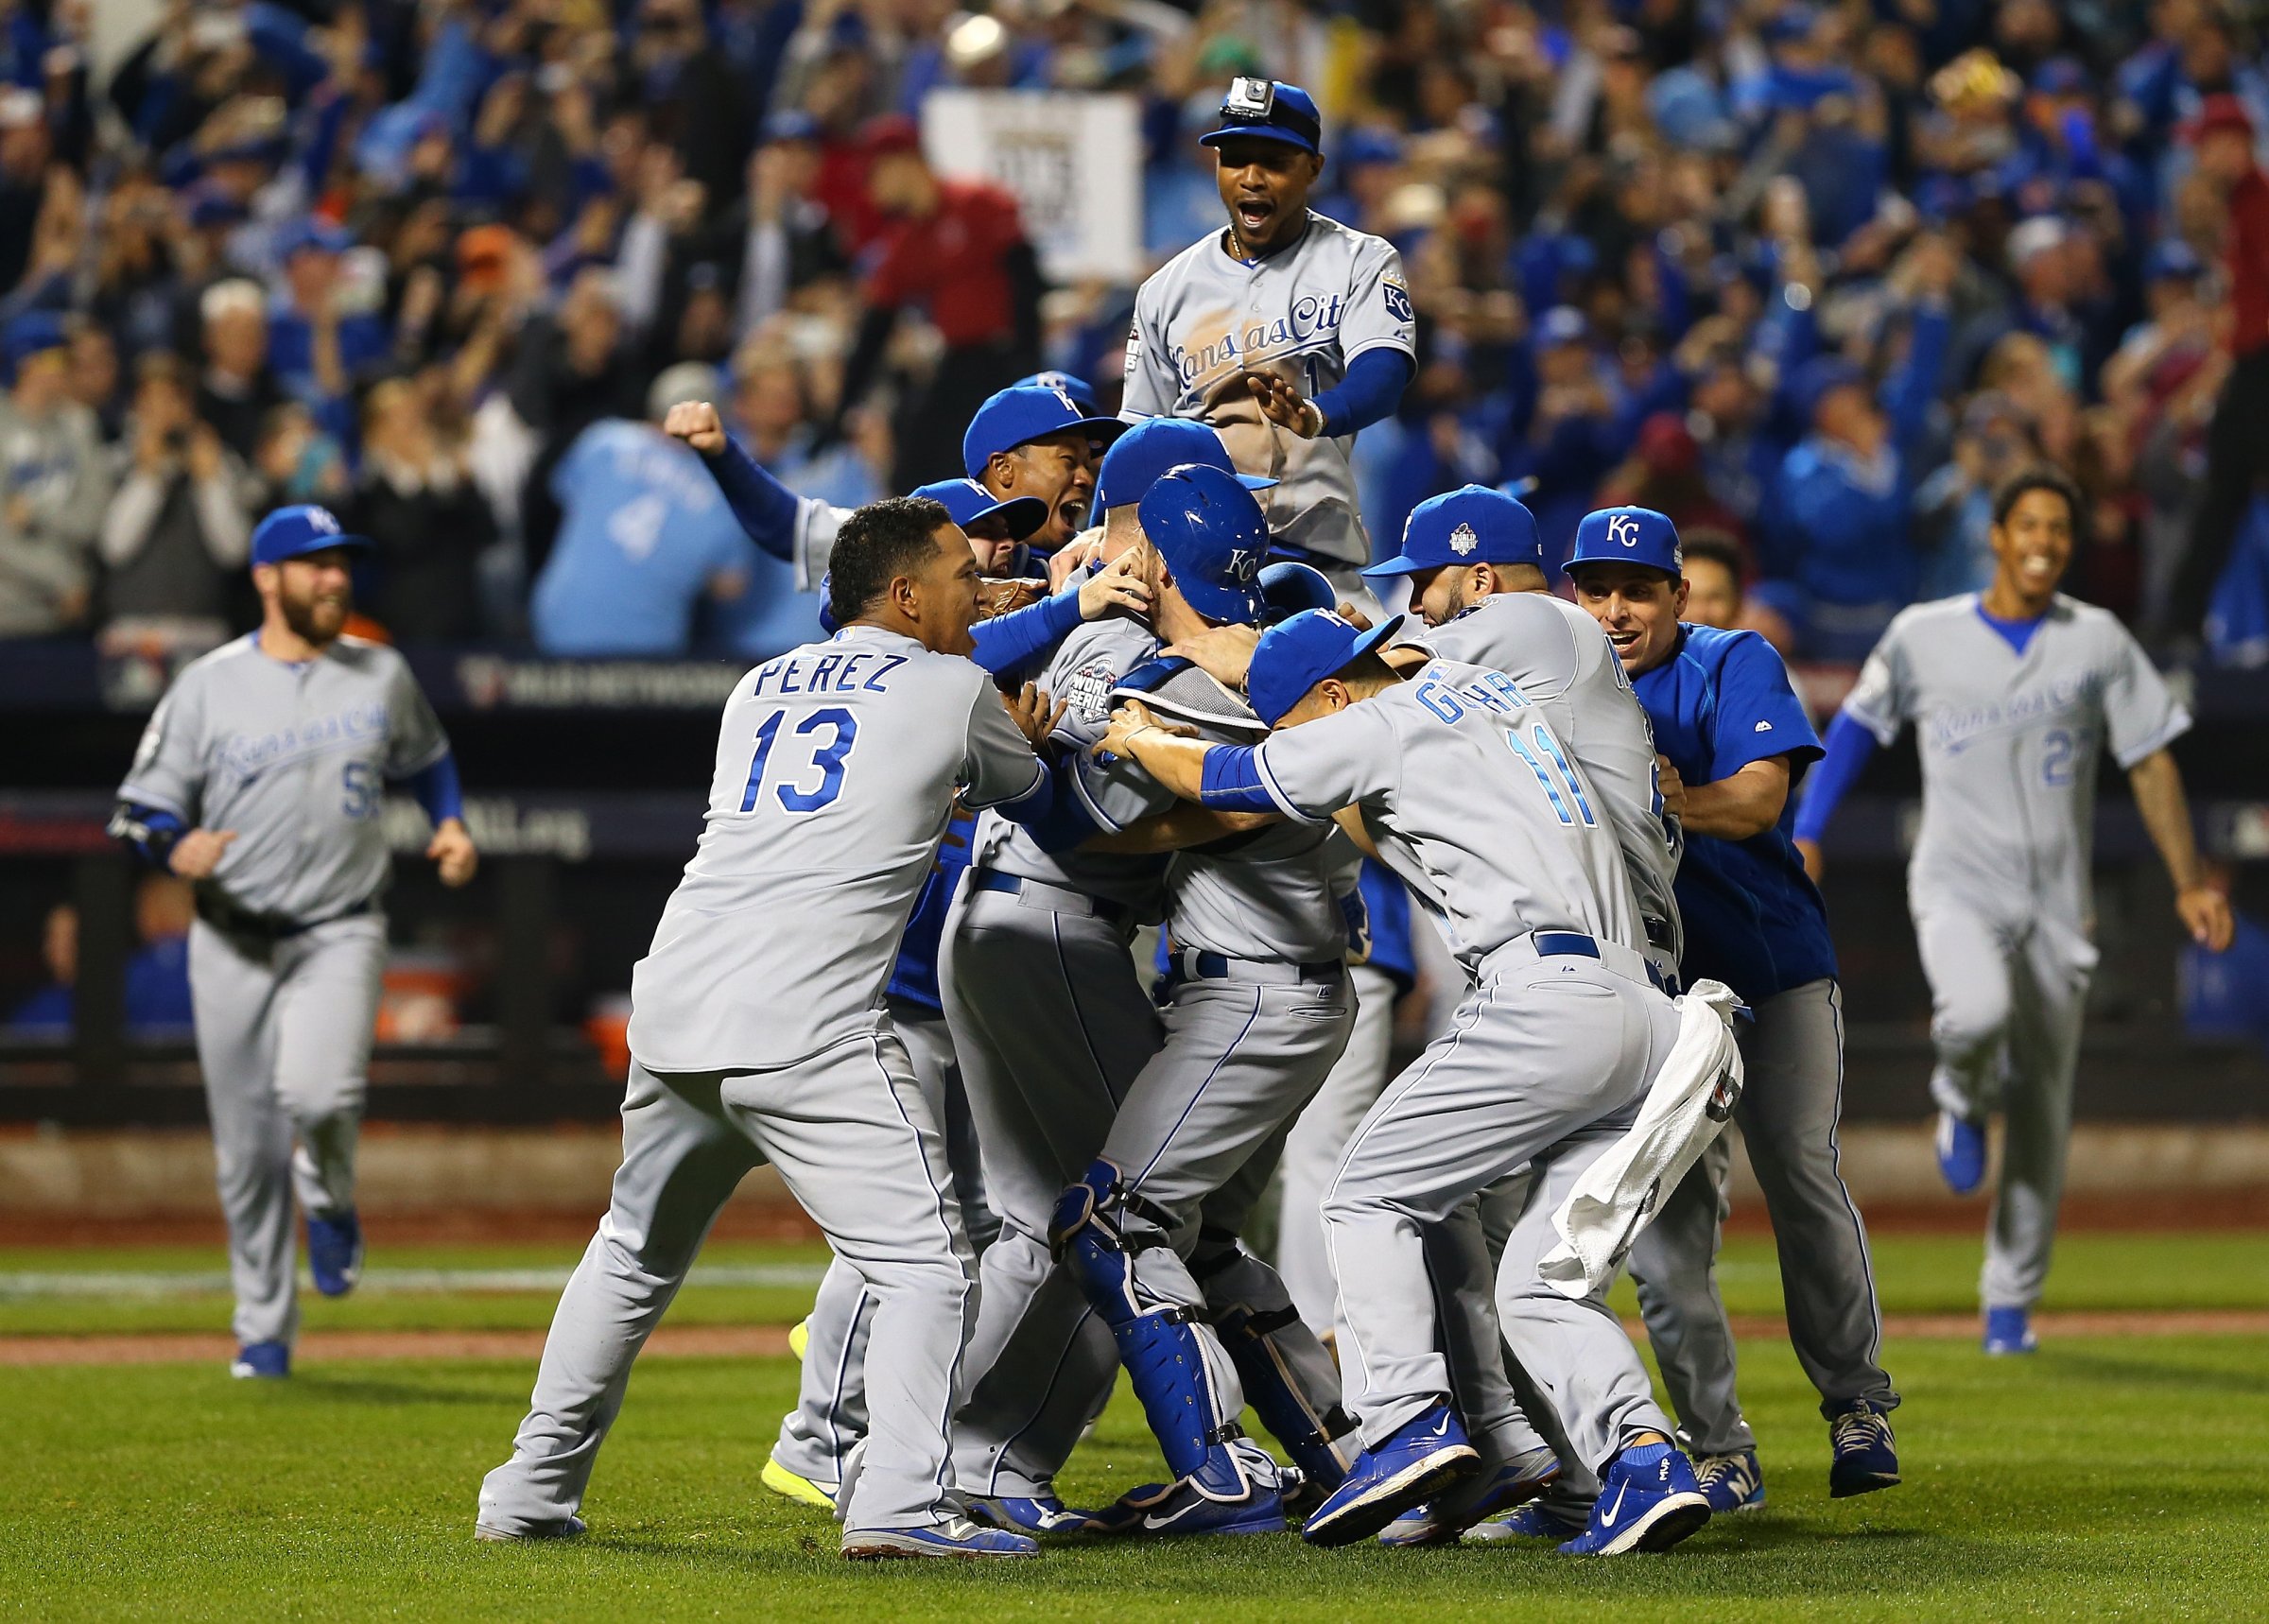 The Kansas City Royals celebrate defeating the New York Mets to win Game 5 of the 2015 World Series at Citi Field on Nov. 1, 2015 in Queens, New York City